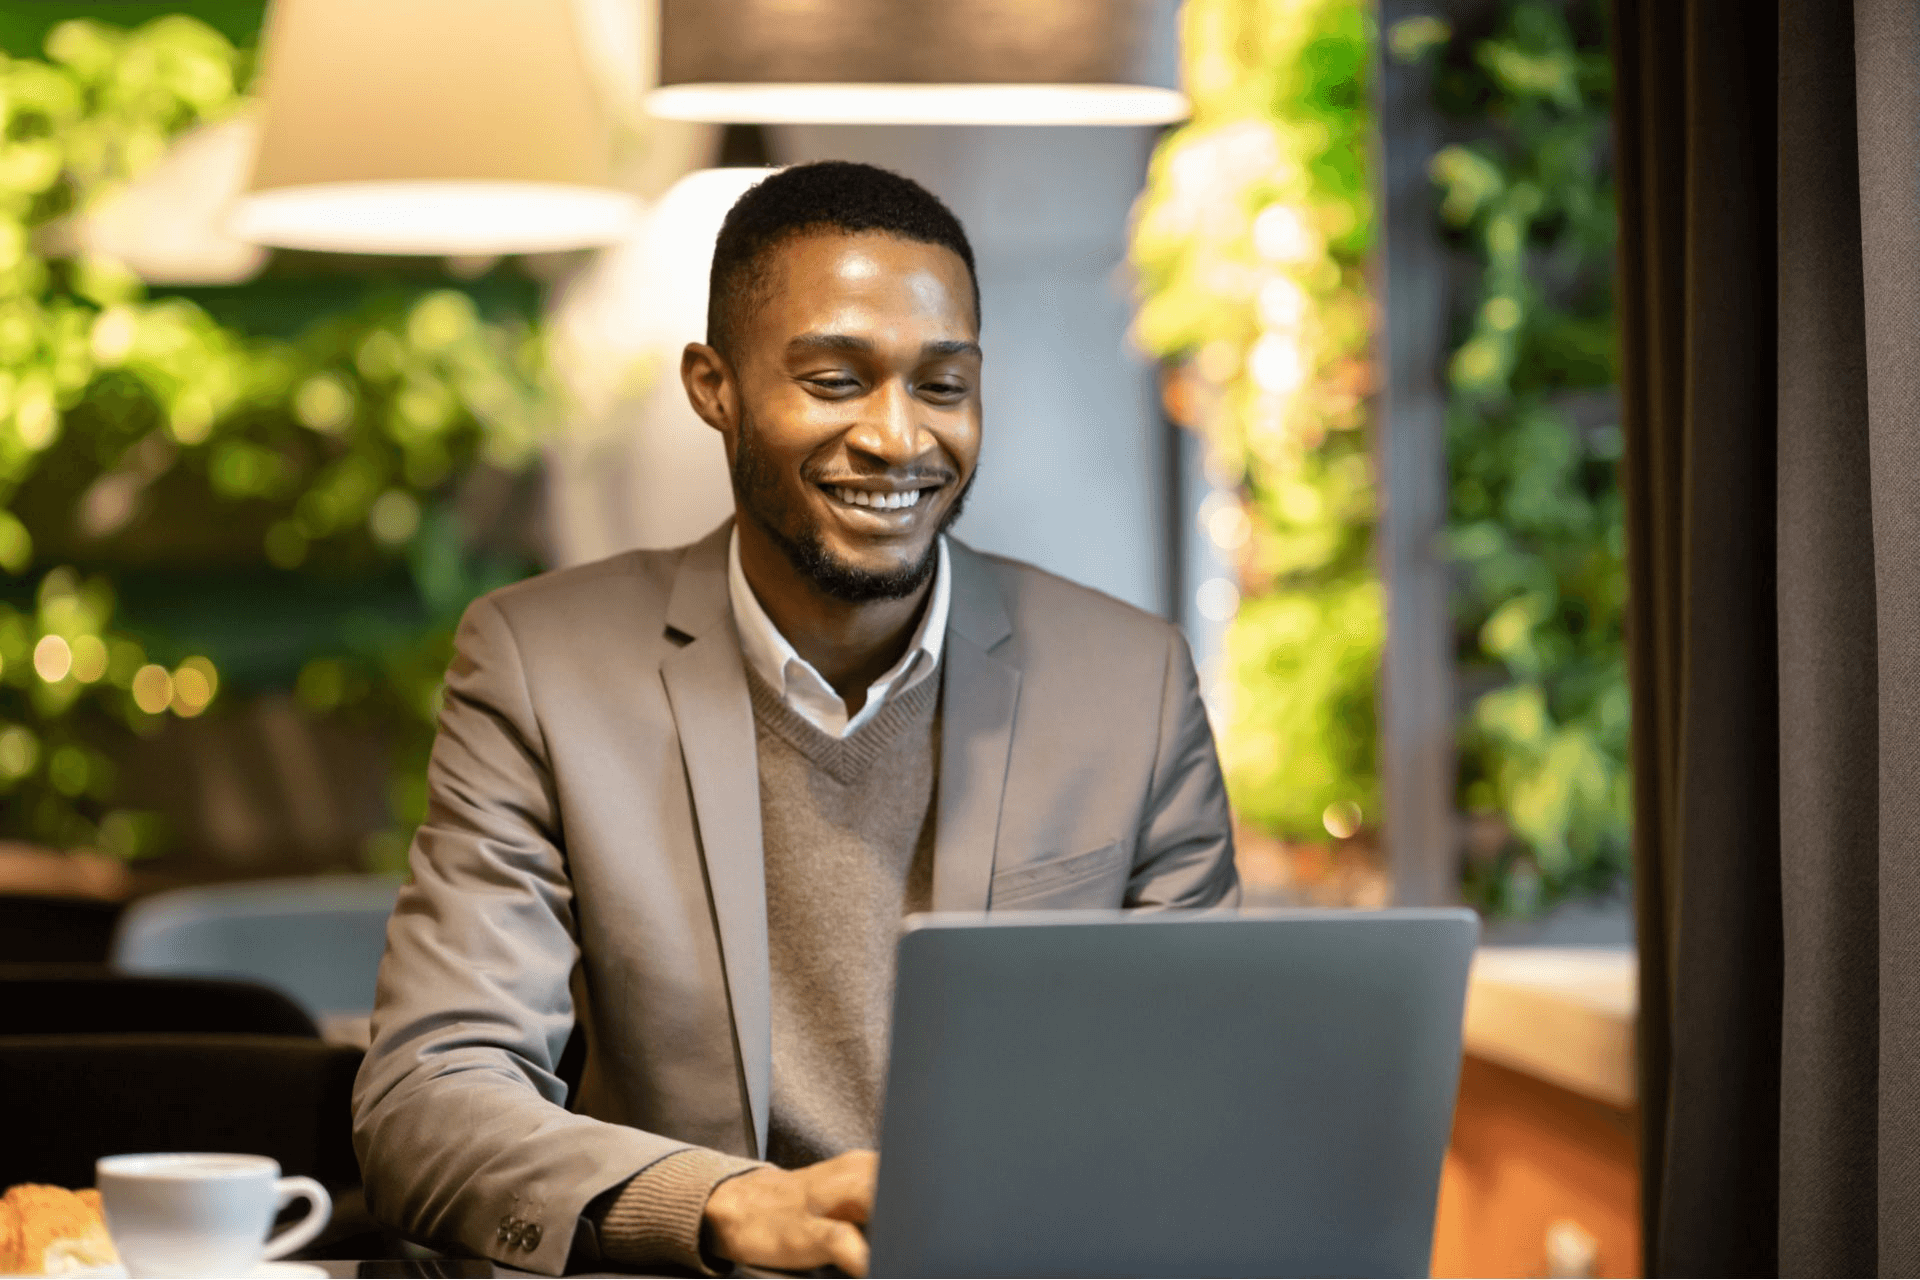 A professional man in a suit, with a cheerful expression, is working on his laptop.